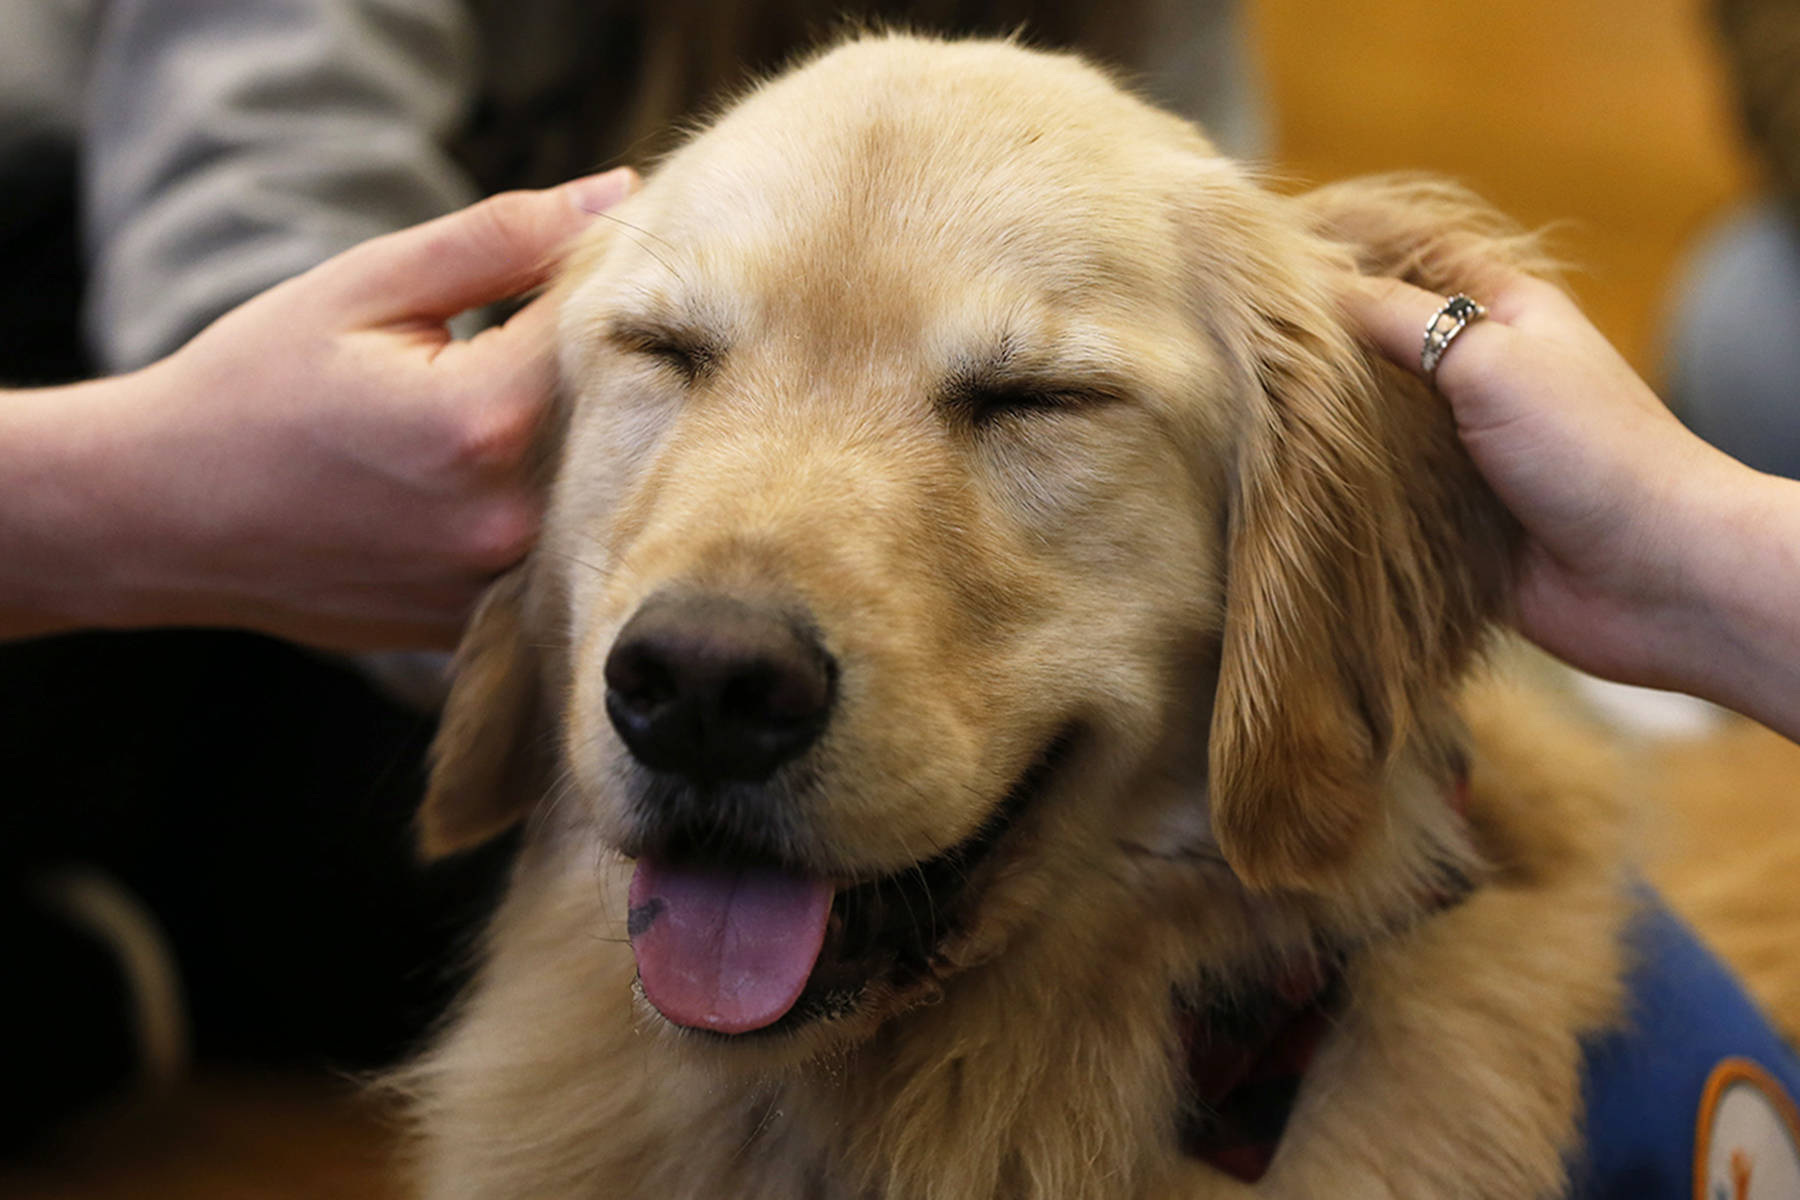 Waffles, a 3-year-old golden retriever and therapy dog, is petted by students at Lane Tech College Prep in Chicago. He was one of several dogs from Canine Therapy Corps offering stress release to Lane Tech students before final exams start. (Stacey Wescott | Chicago Tribune)